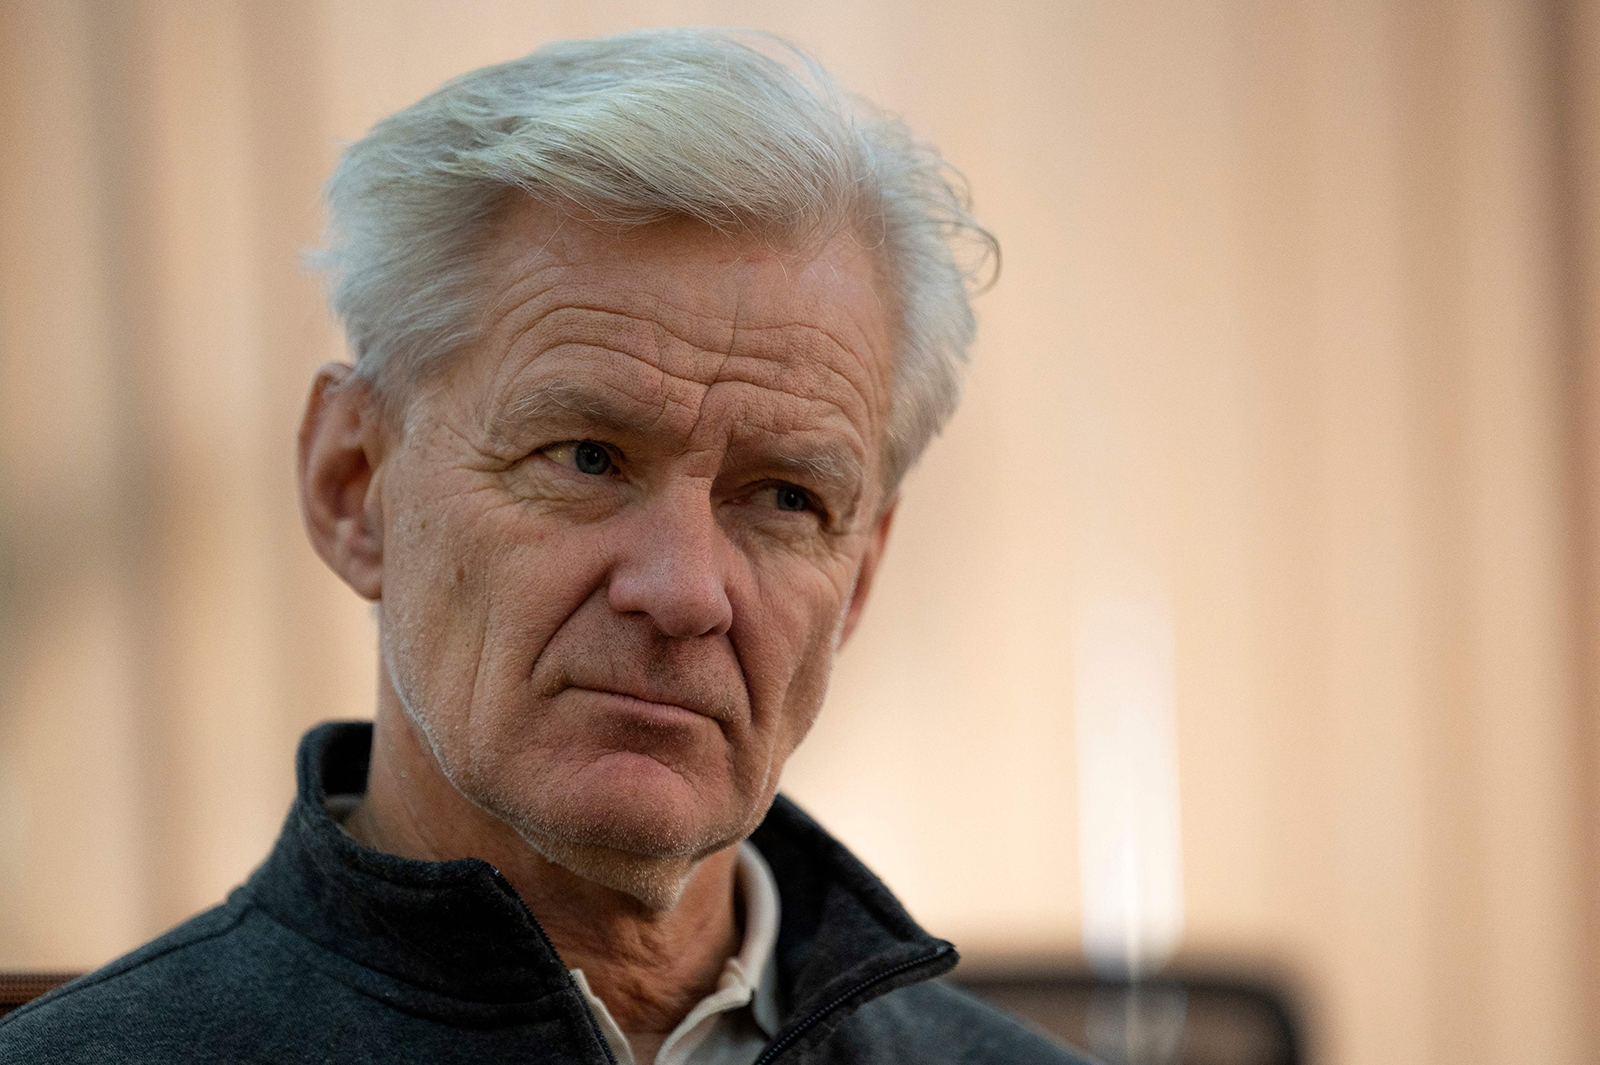 Jan Egeland, secretary-general of the independent Norwegian Refugee Council (NRC), during an interview in Kabul, Afghanistan, on January 9, 2023.